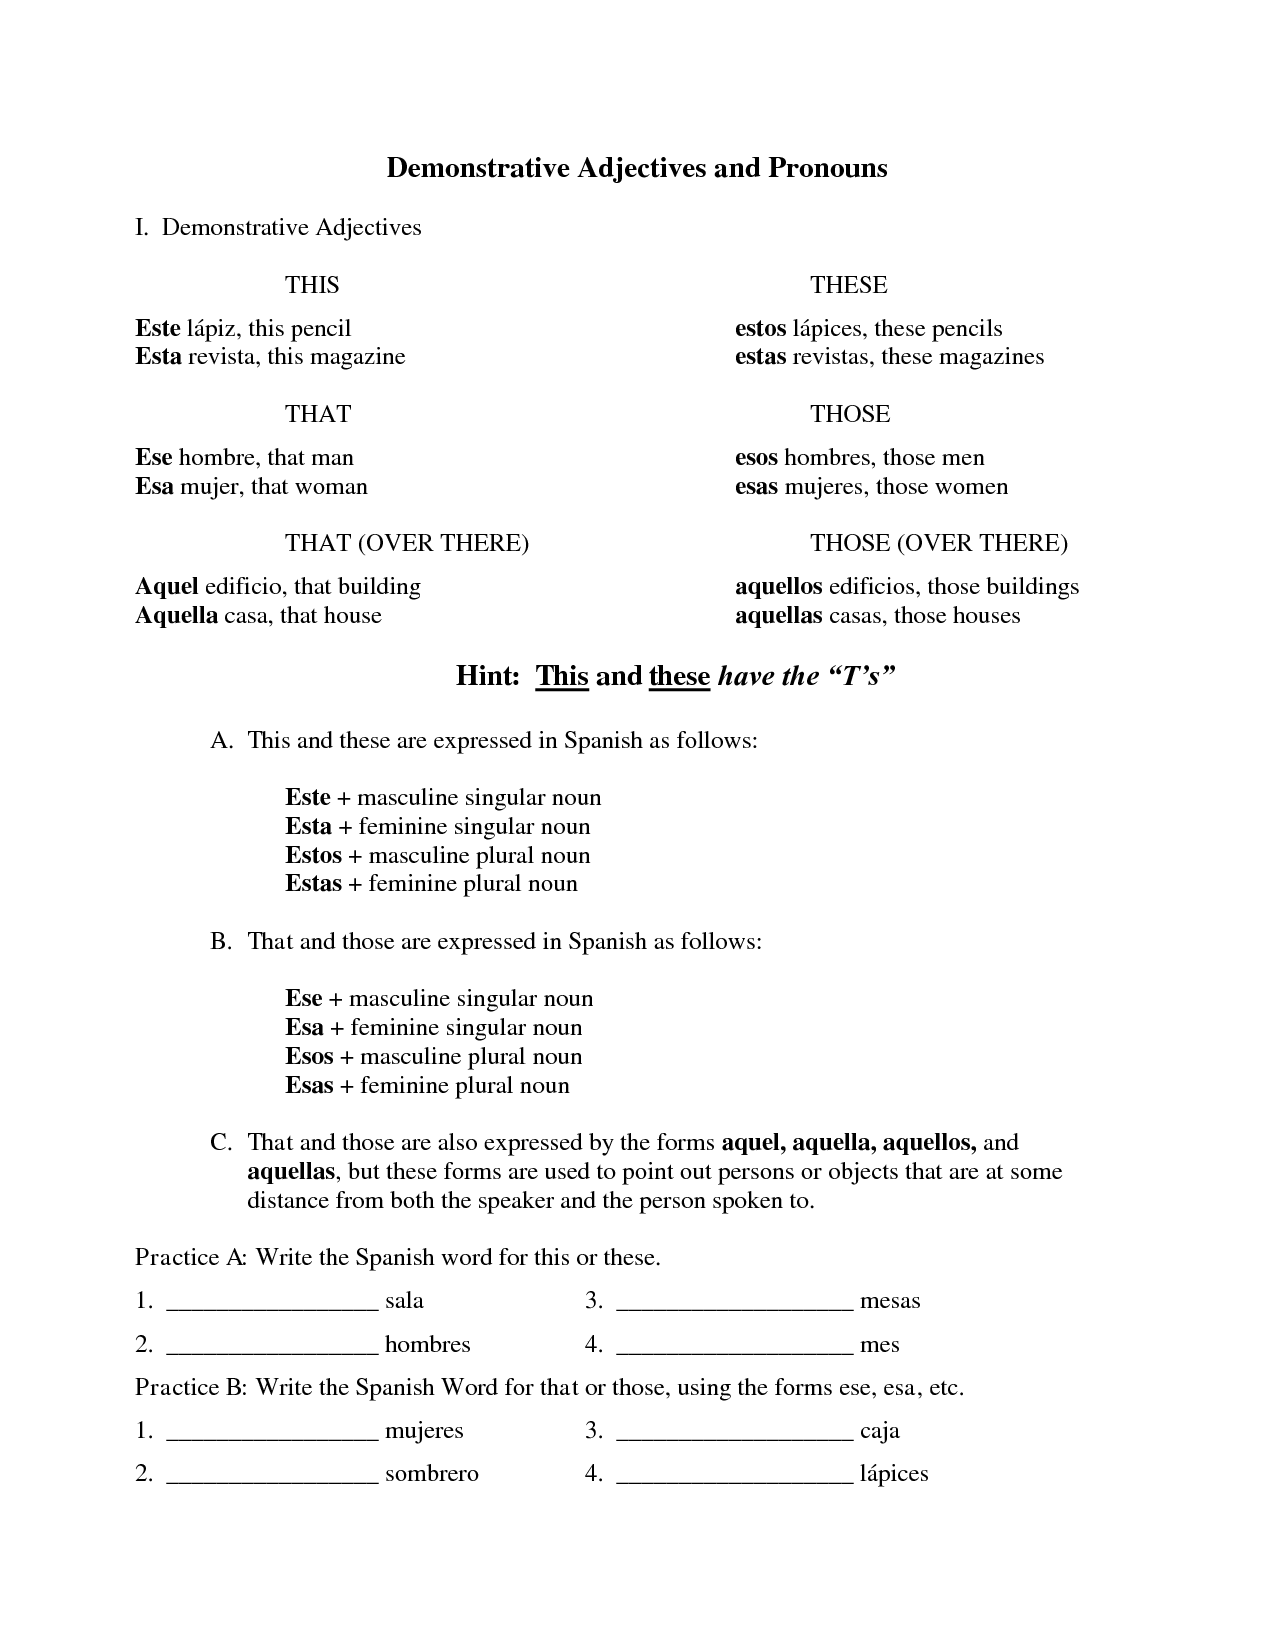 17-best-images-of-direct-object-worksheets-grade-6-pronouns-worksheets-6th-grade-printable